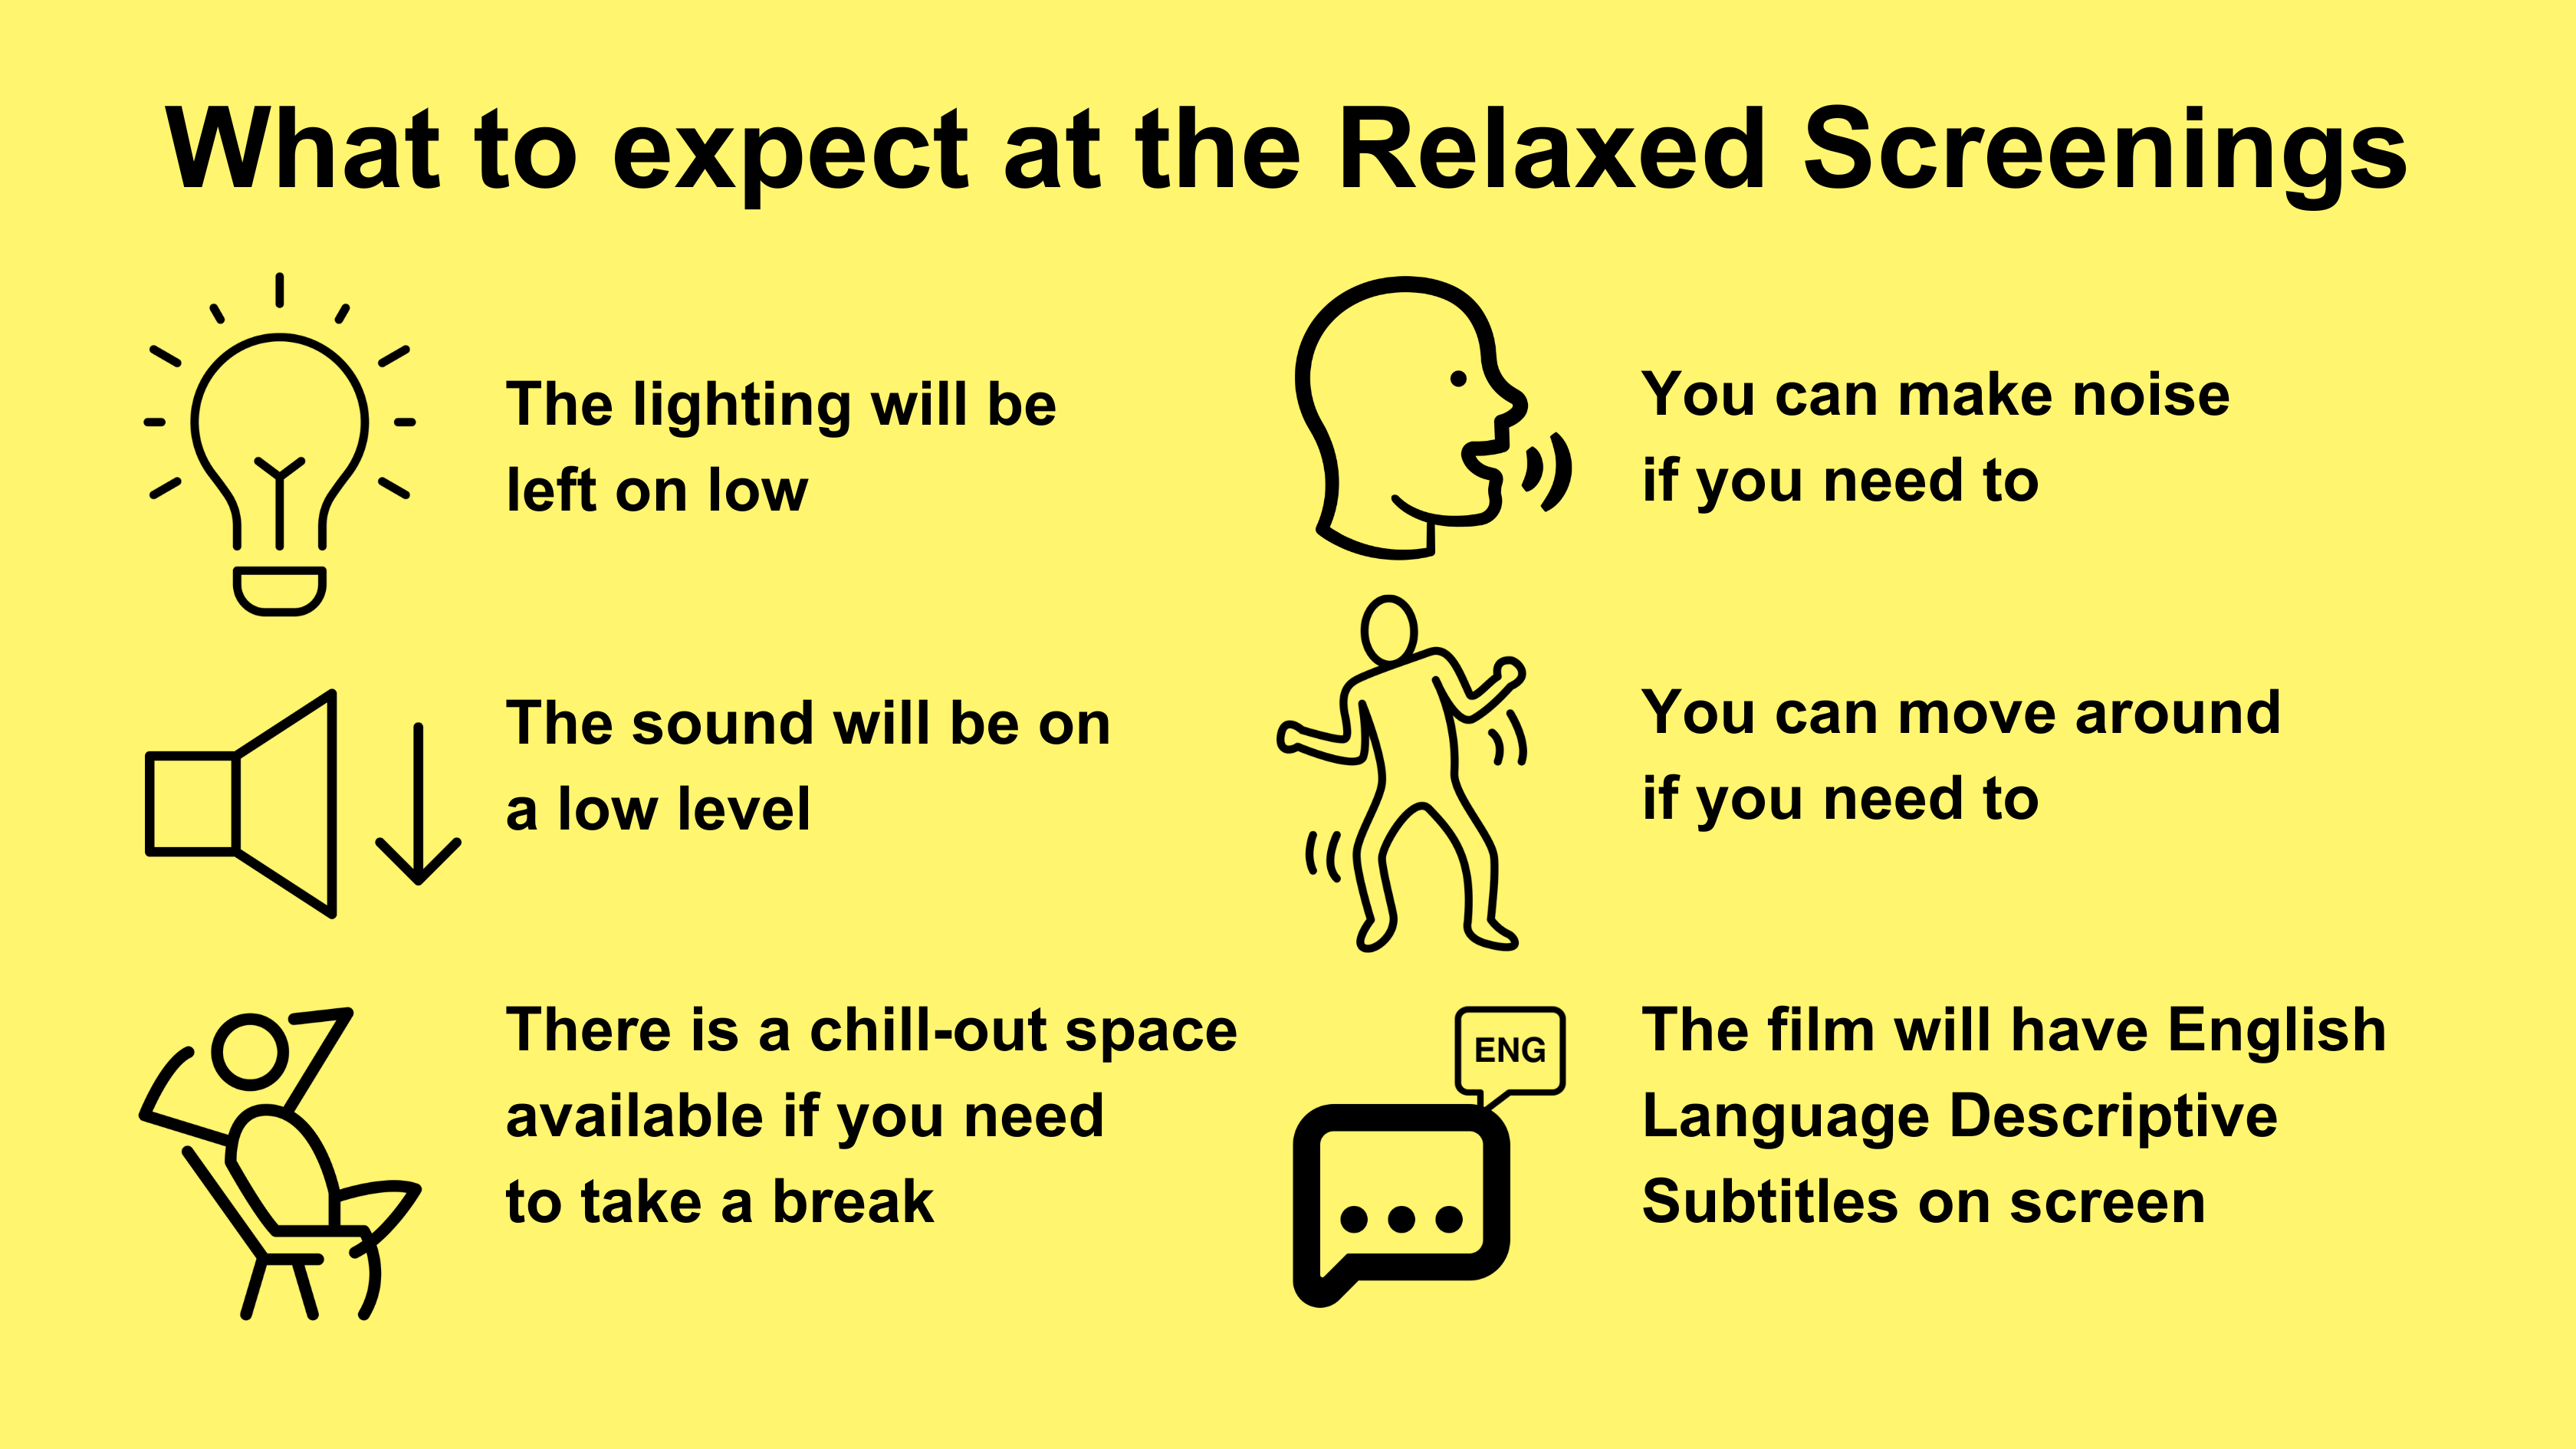 Access icons for Relaxed Screenings on a yellow background with black text